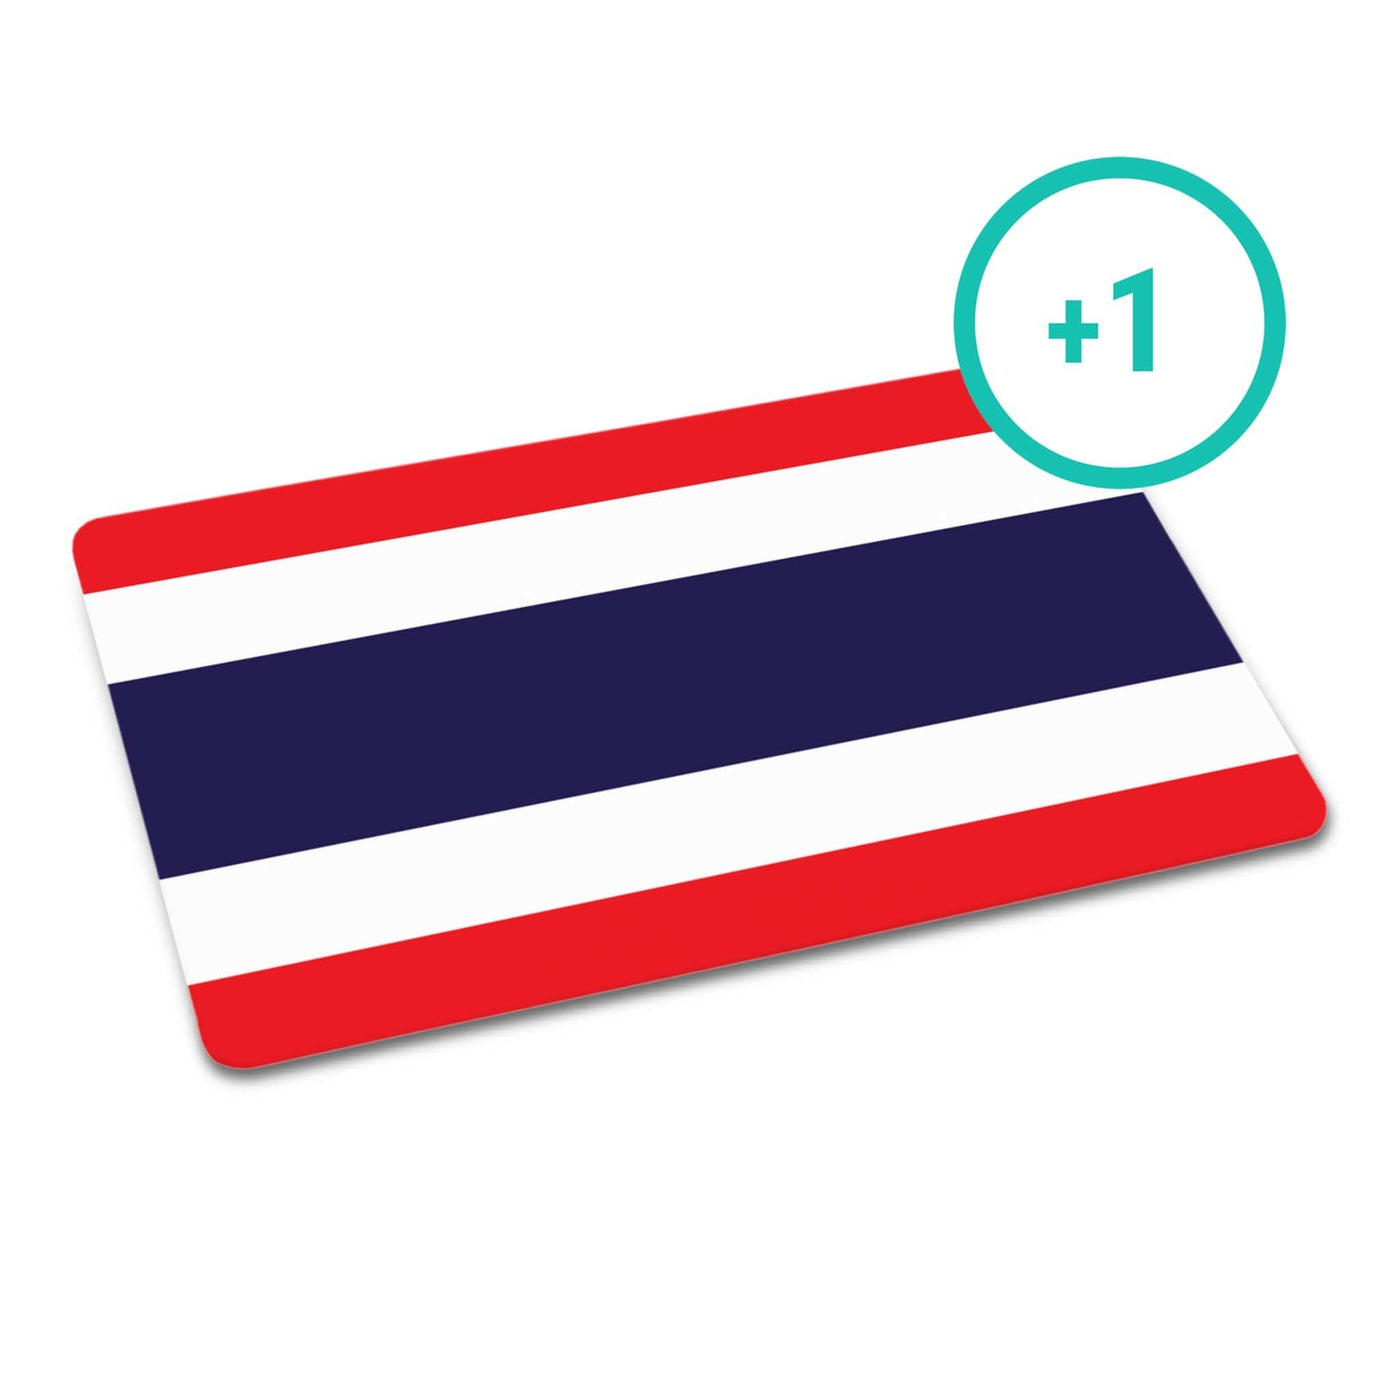 Additional Customized Card: Thai (Leave in cart to purchase)